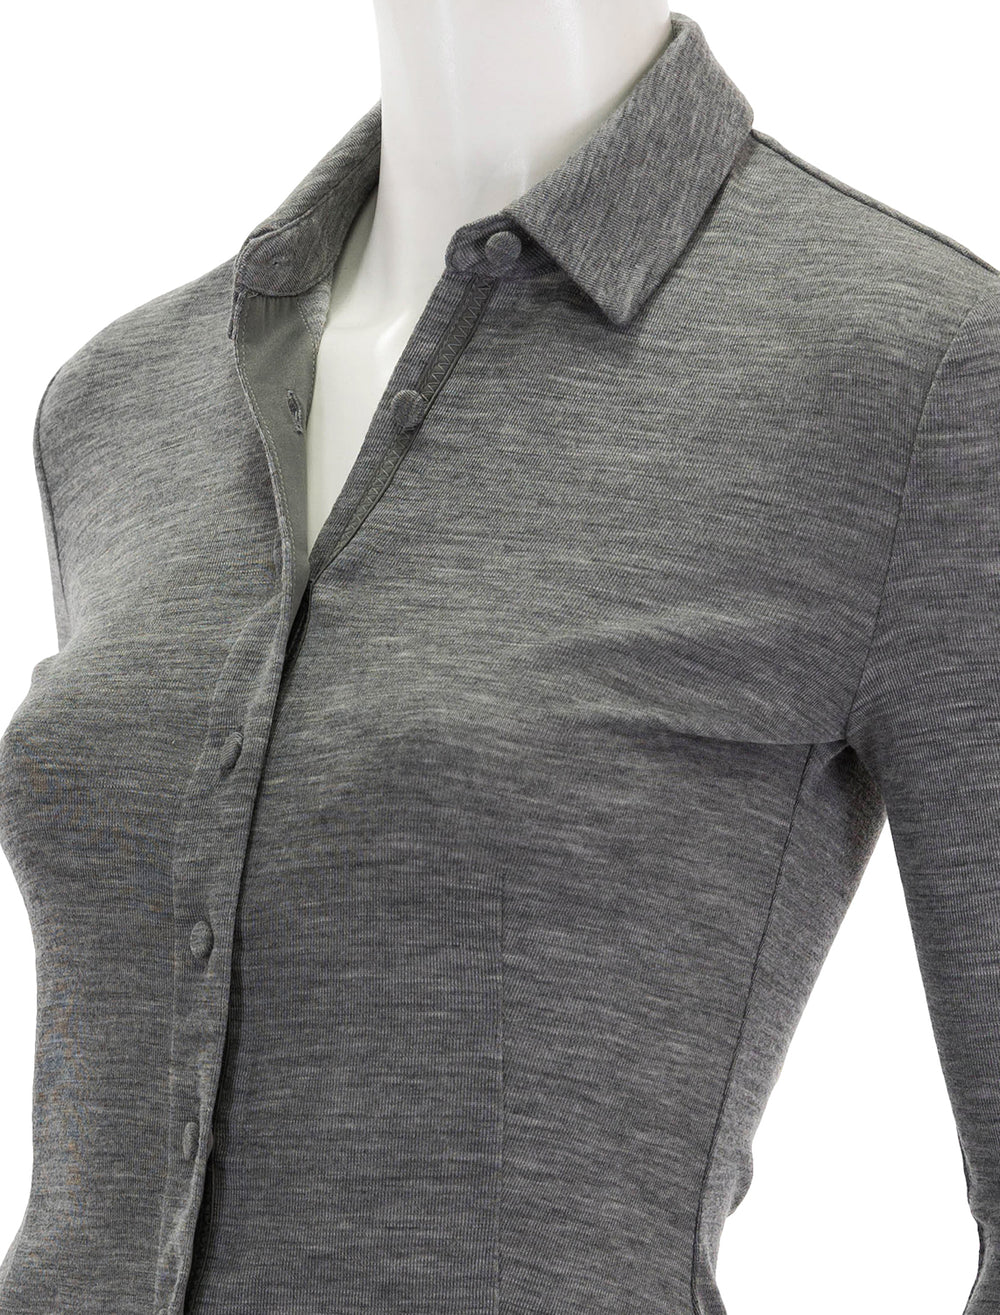 Close-up view of Rag & Bone's harlow shirt in heather grey.